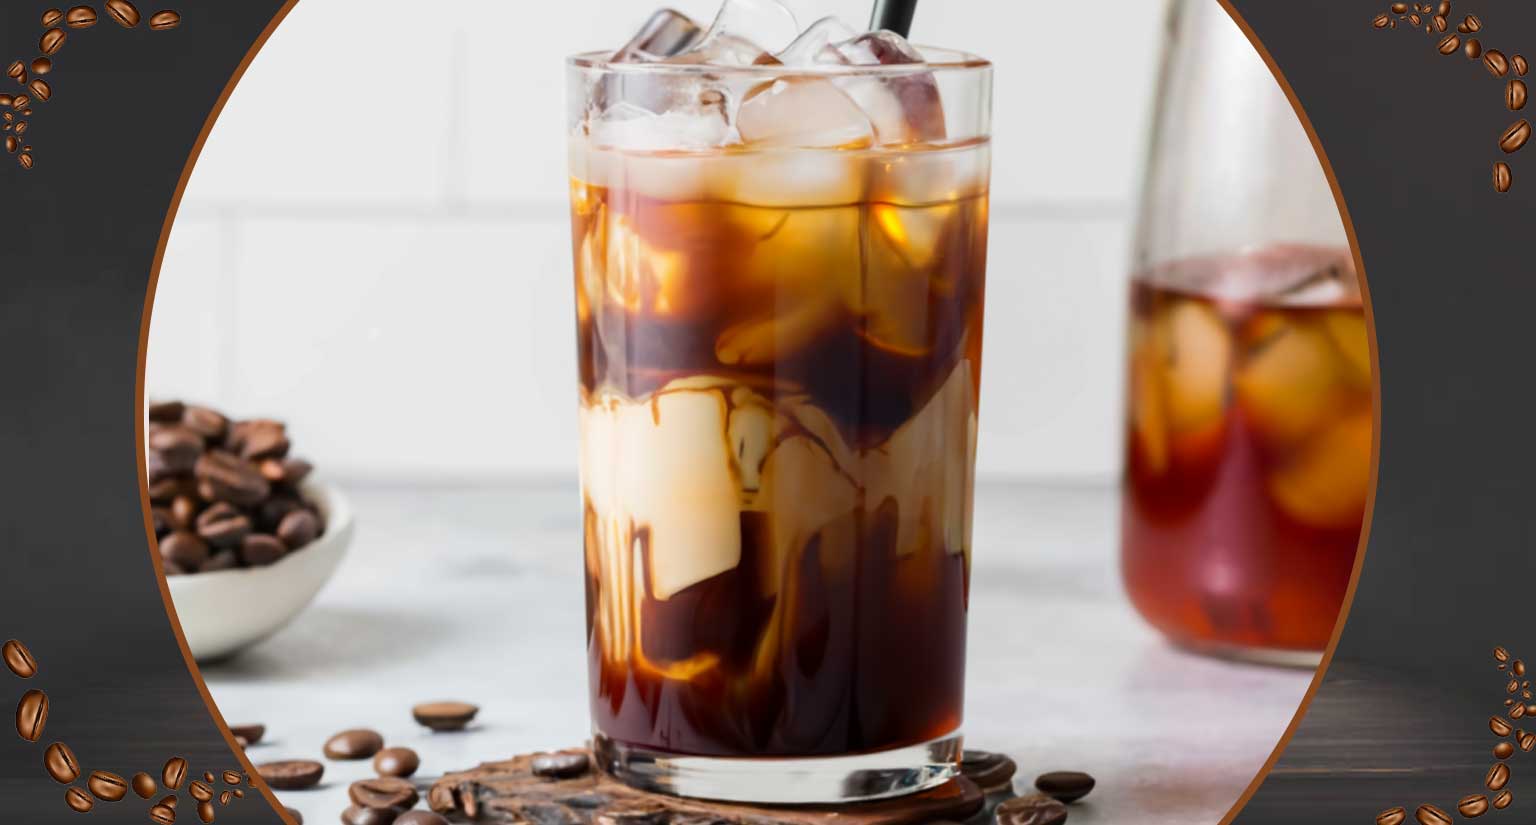 How to Make Iced Coffee at Home?